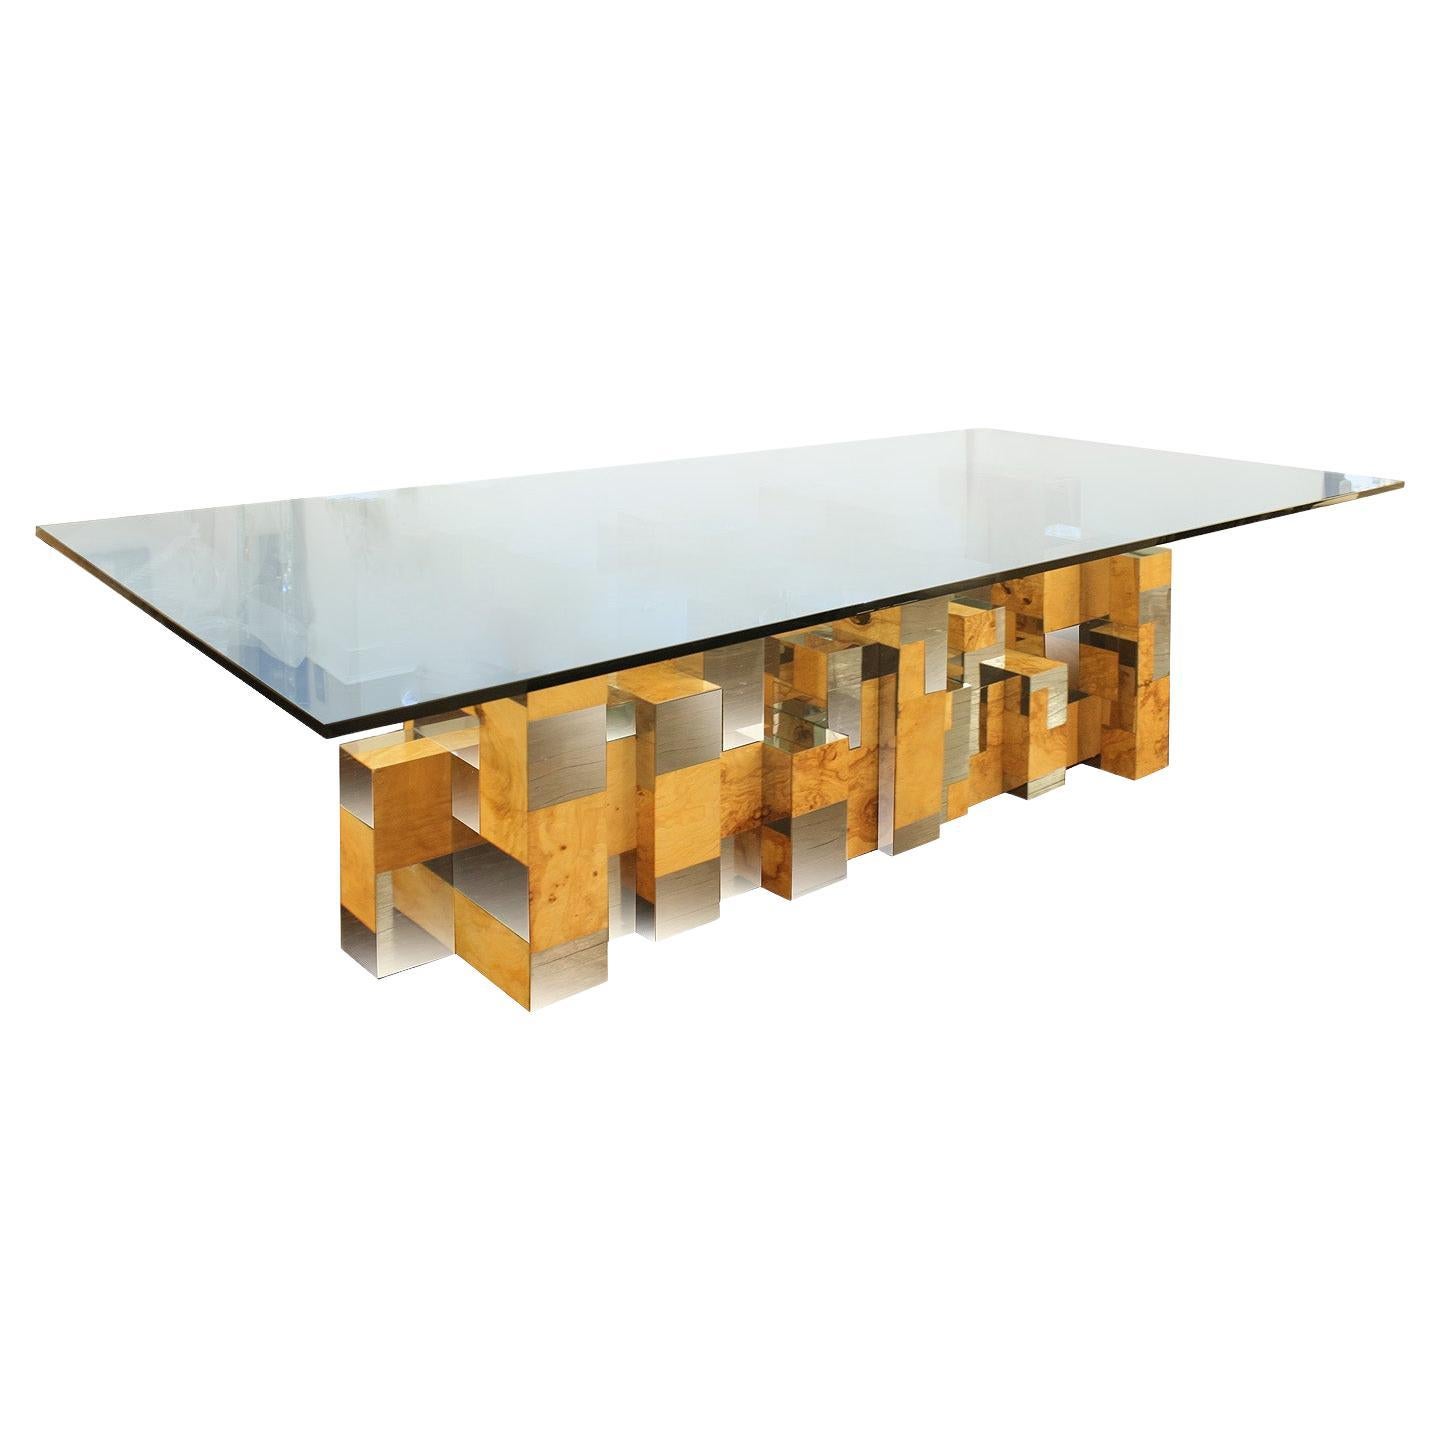 Iconic tesselated polshed chrome and olive burl, PE 400 dining table by Paul Evans for Directional Furniture. American 1970's

 

Dimensions (with glass)

Width: 96 inches
Depth: 48 inches
Height: 29 inches

 
Base:

Width: 67